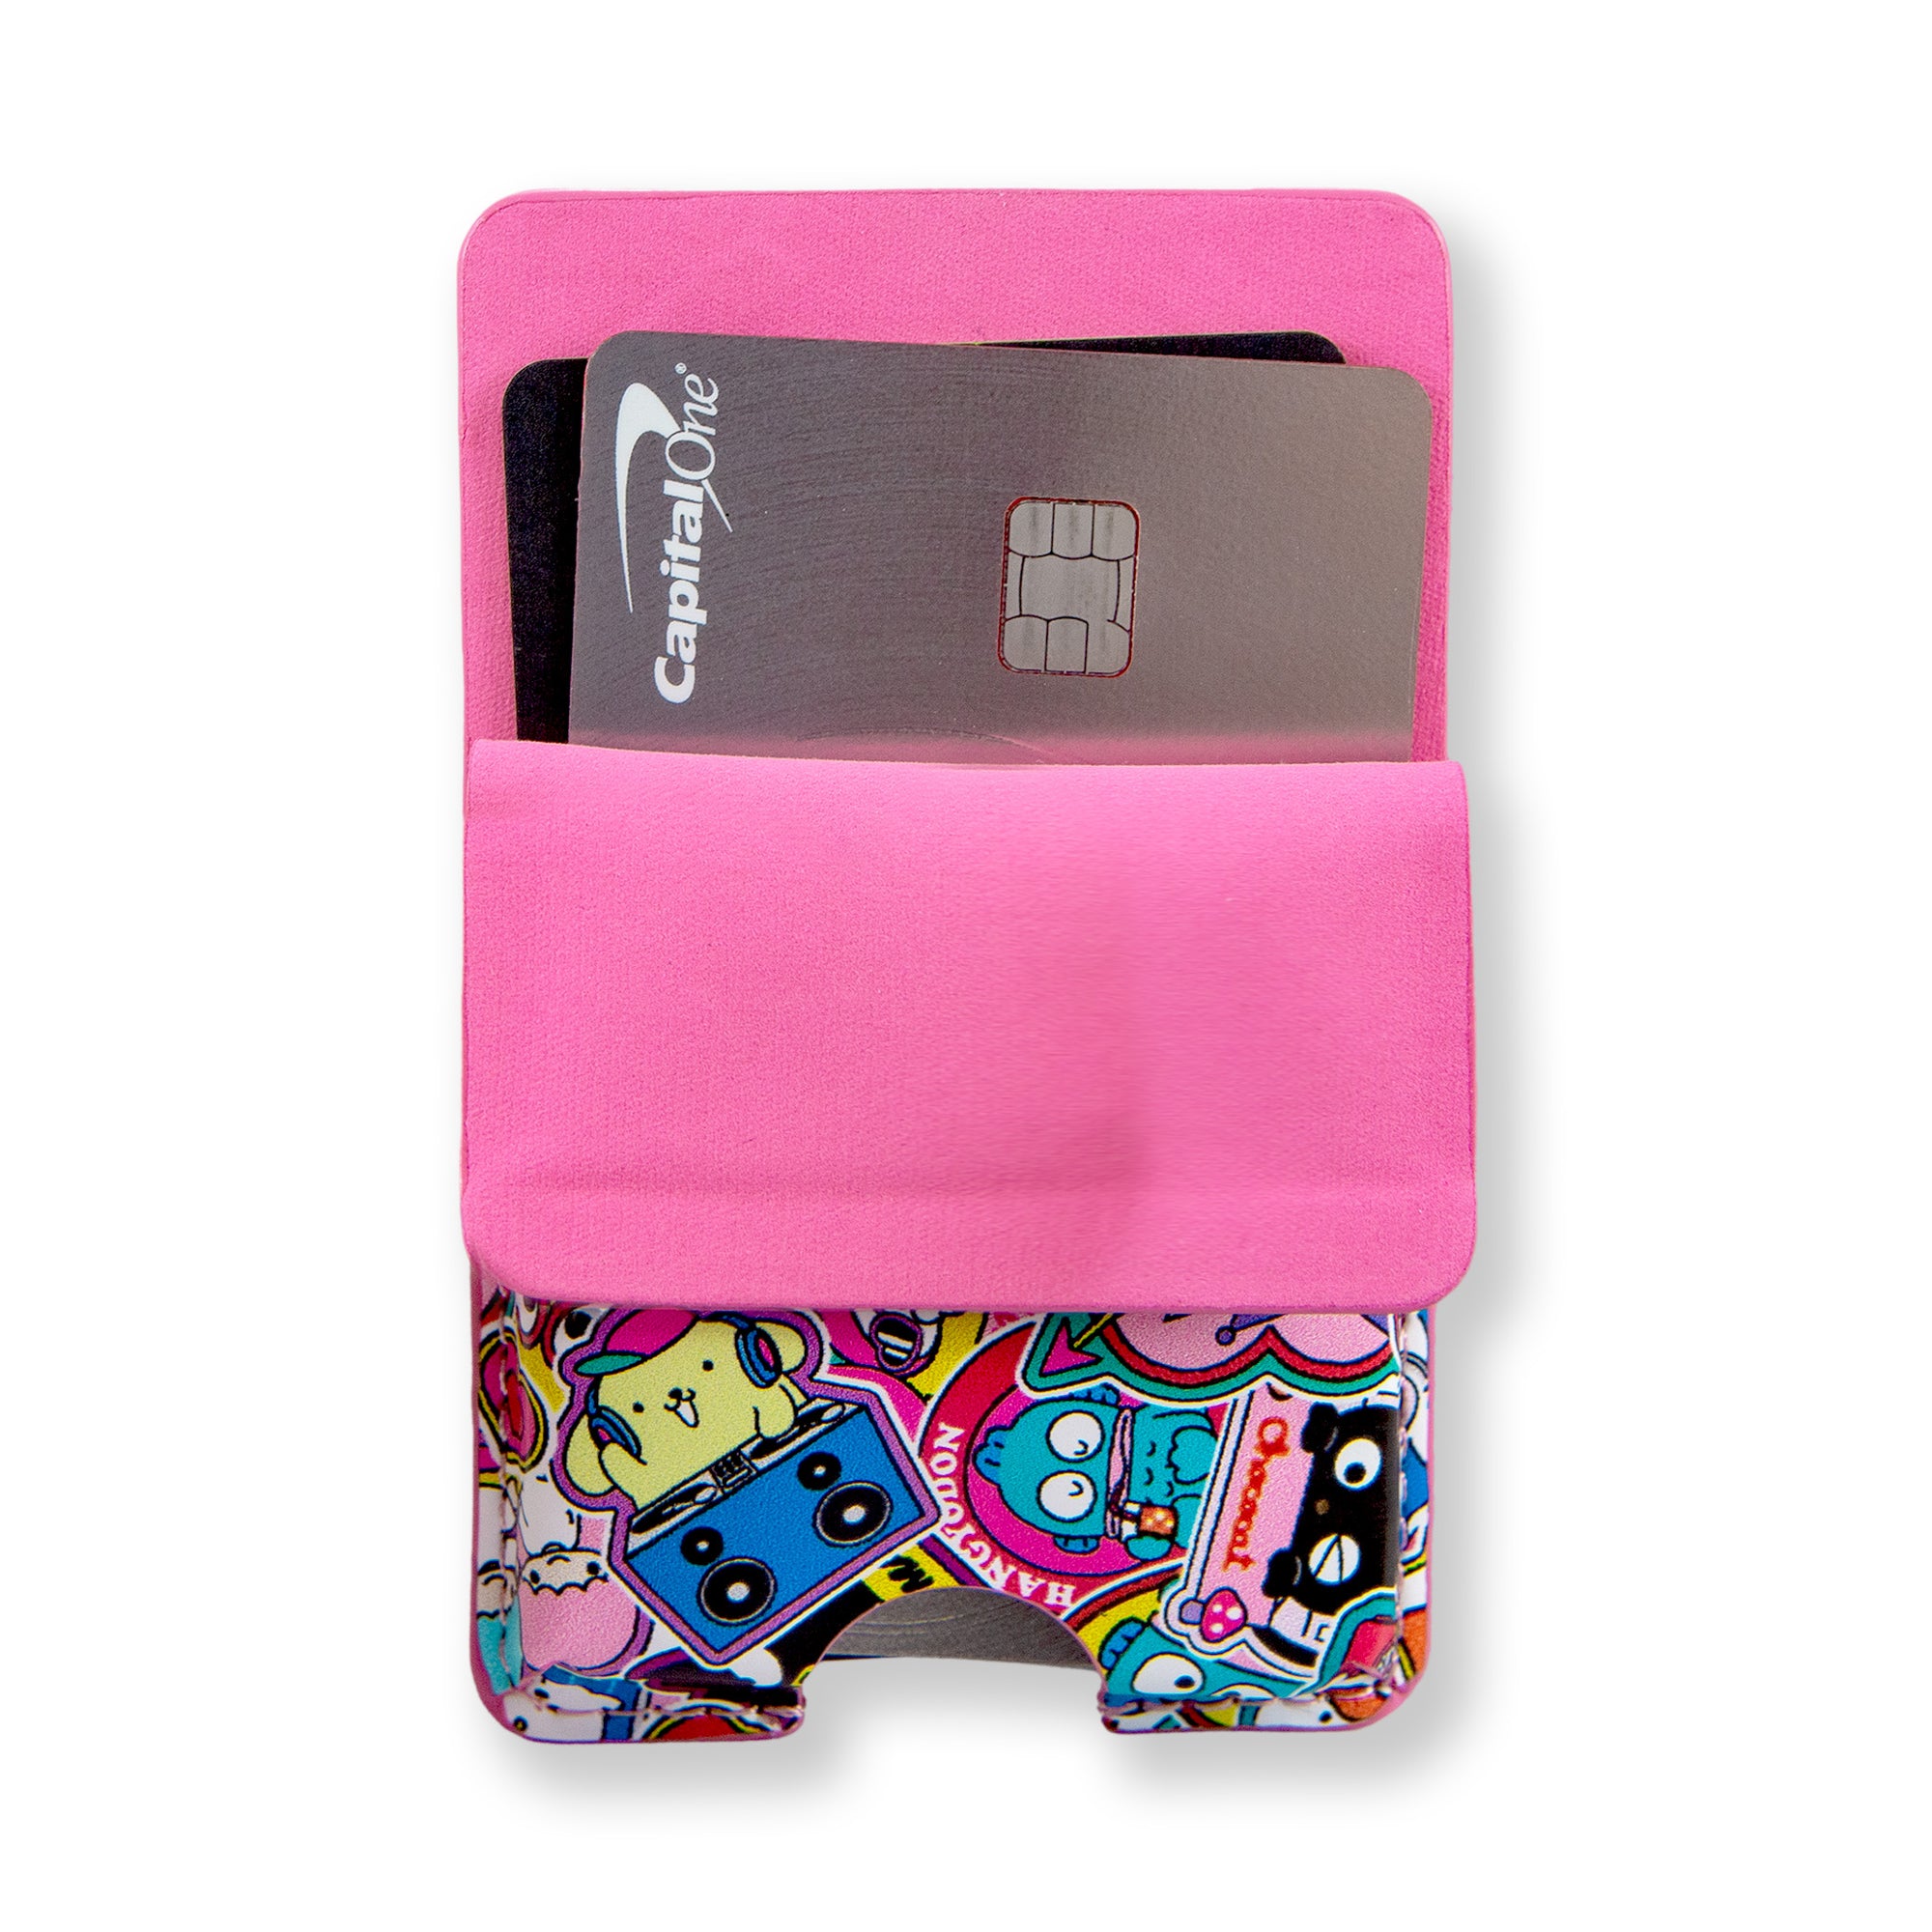 Hello Kitty and Friends x Sonix Stickers Magnetic Wallet Accessory BySonix Inc.   